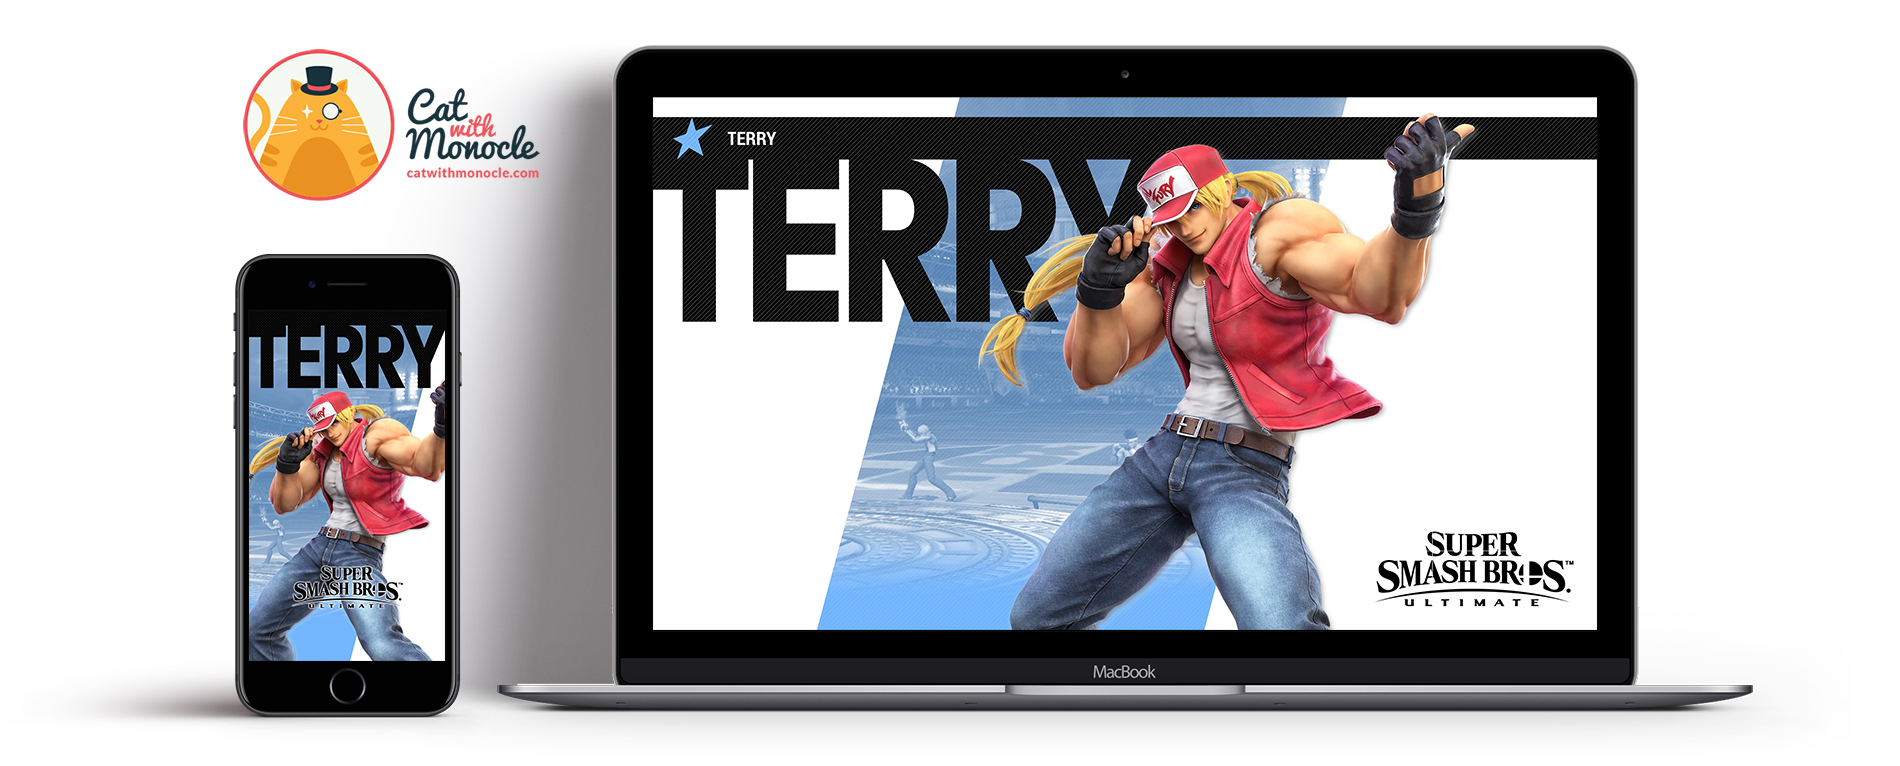 Super Smash Bros Ultimate Terry Wallpapers